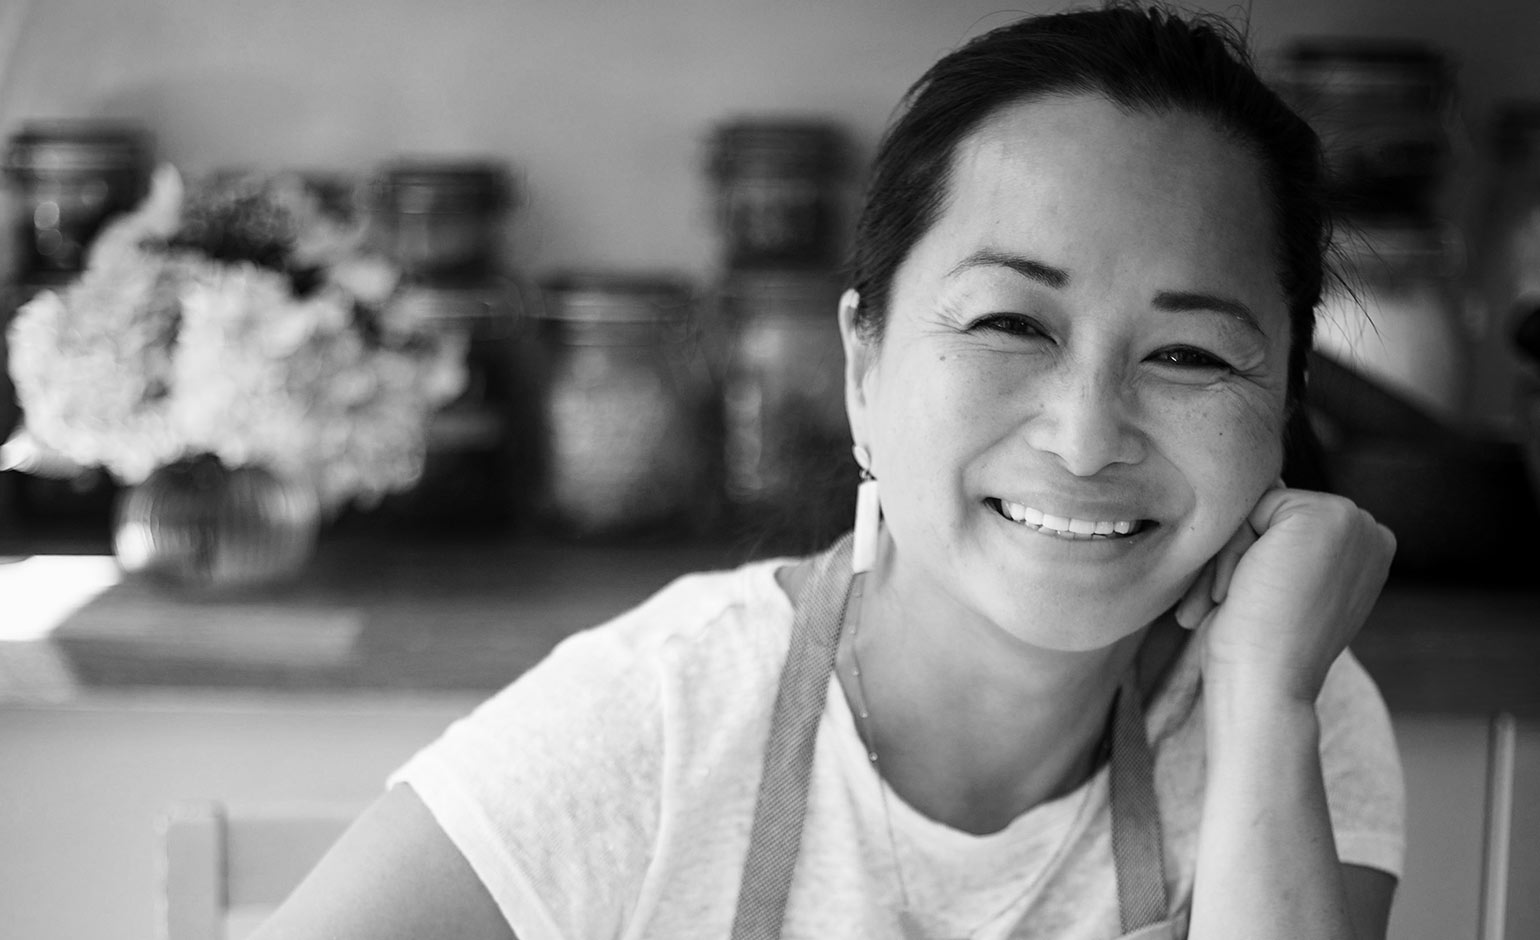 Noya s Kitchen to open new Vietnamese eatery in Bath this 